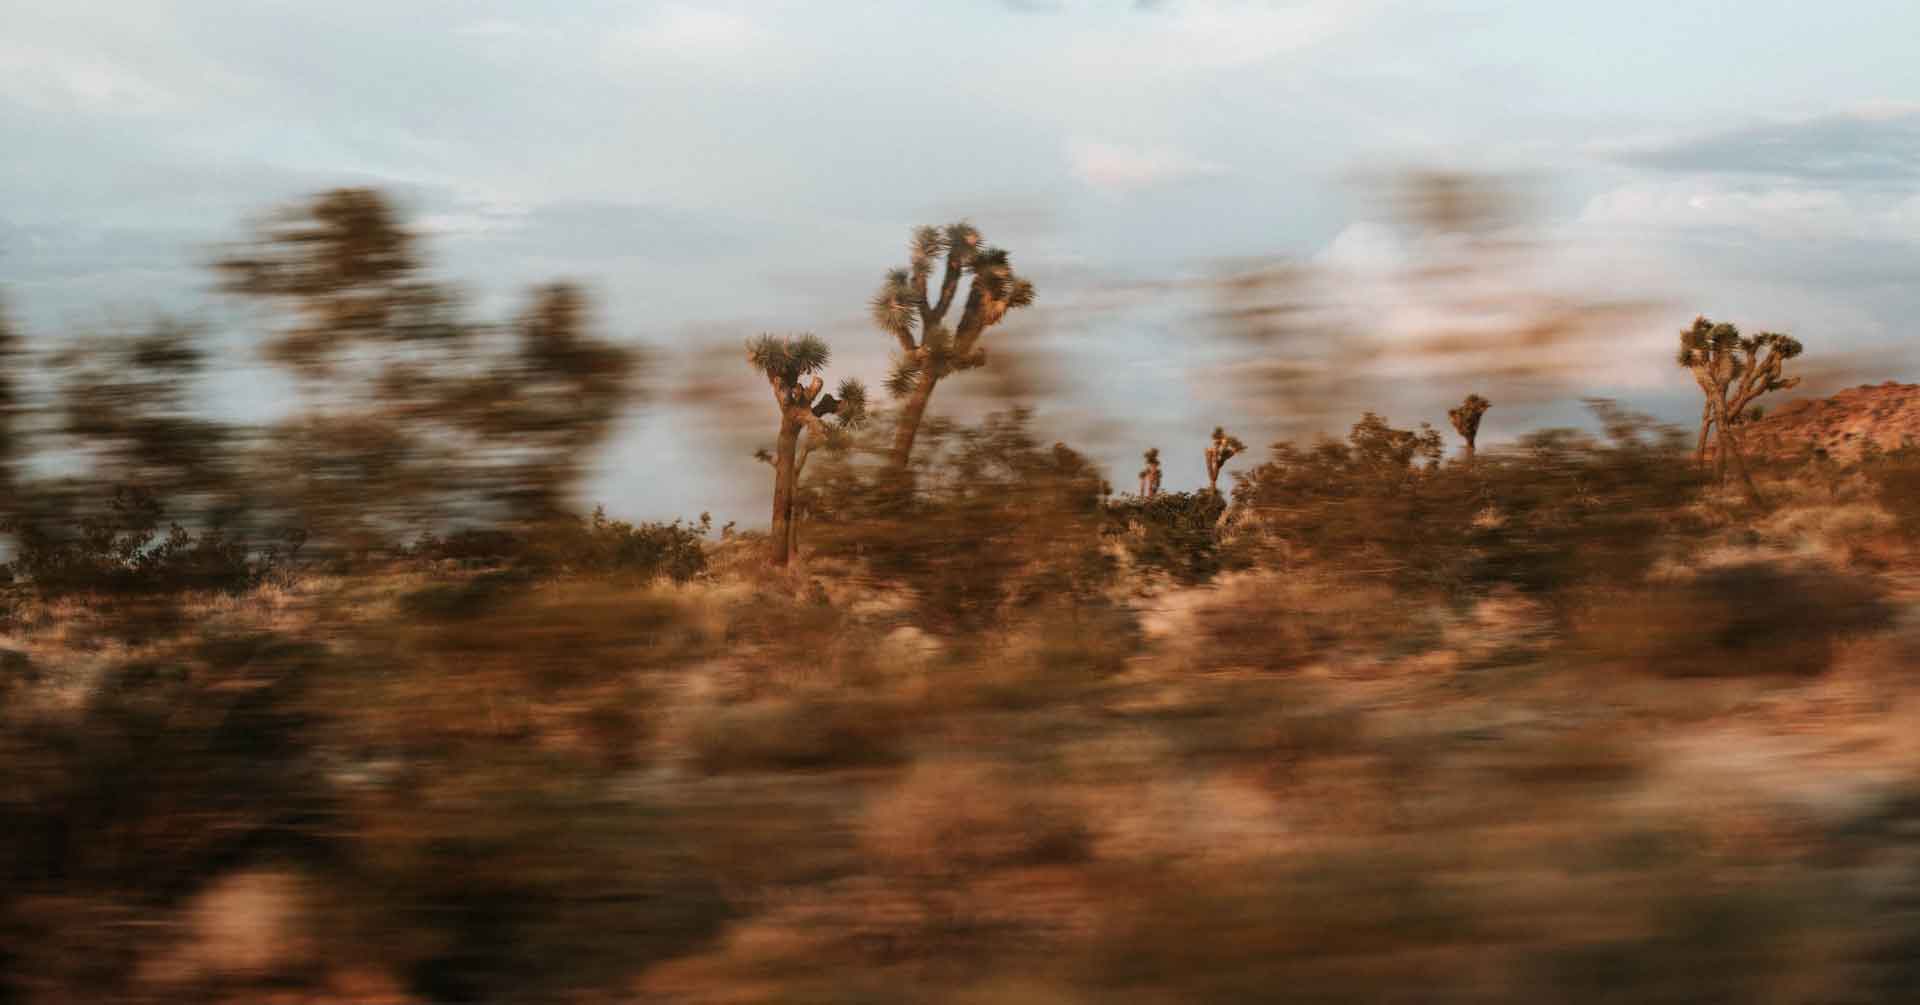 Abstract image of speeding past a scenic highway from a truck